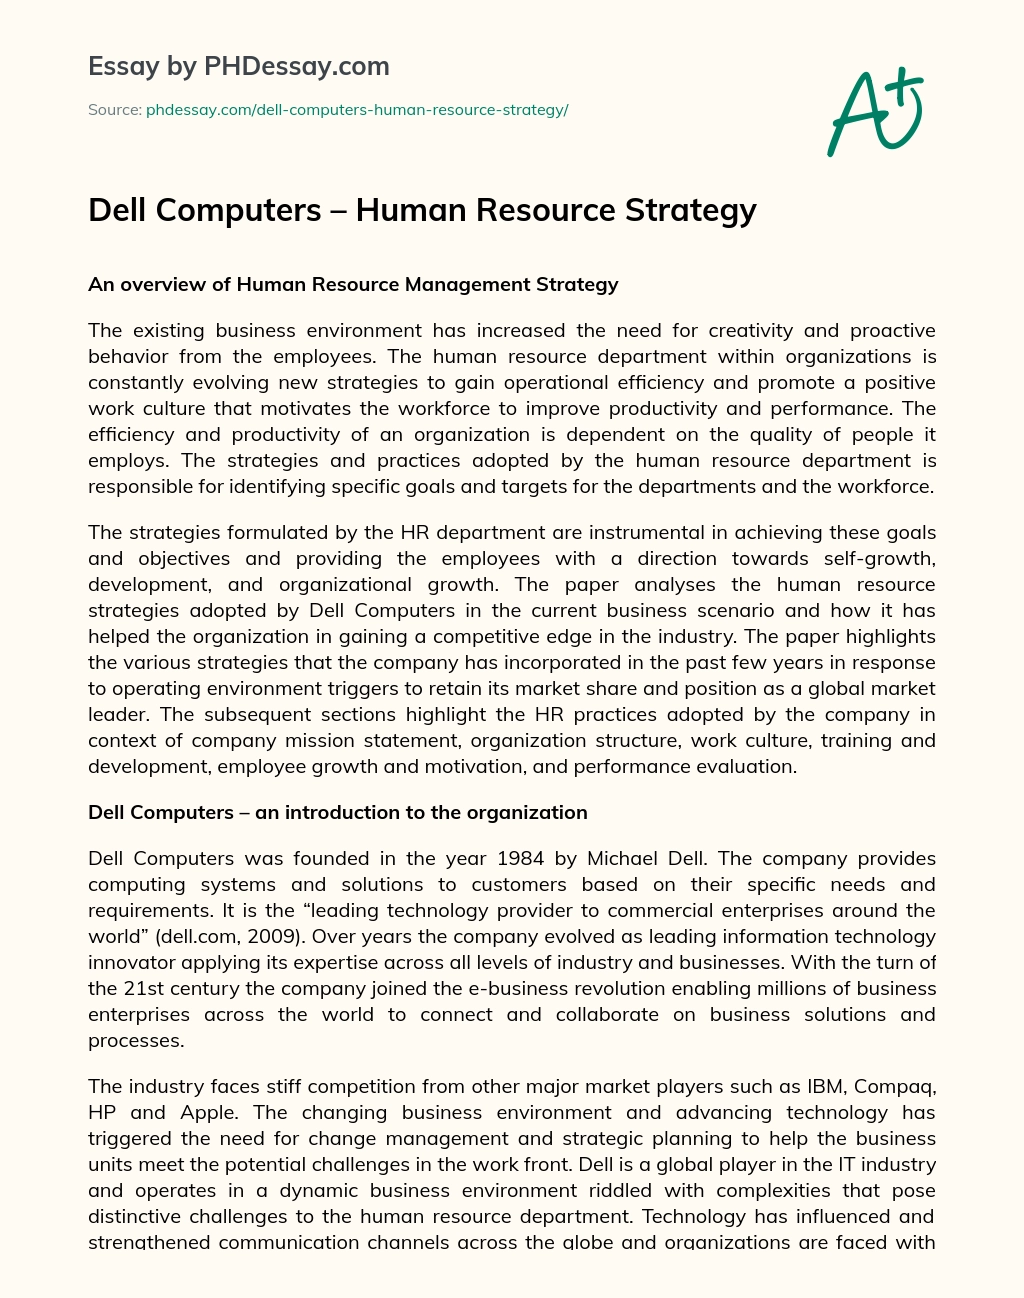 Dell Computers – Human Resource Strategy essay